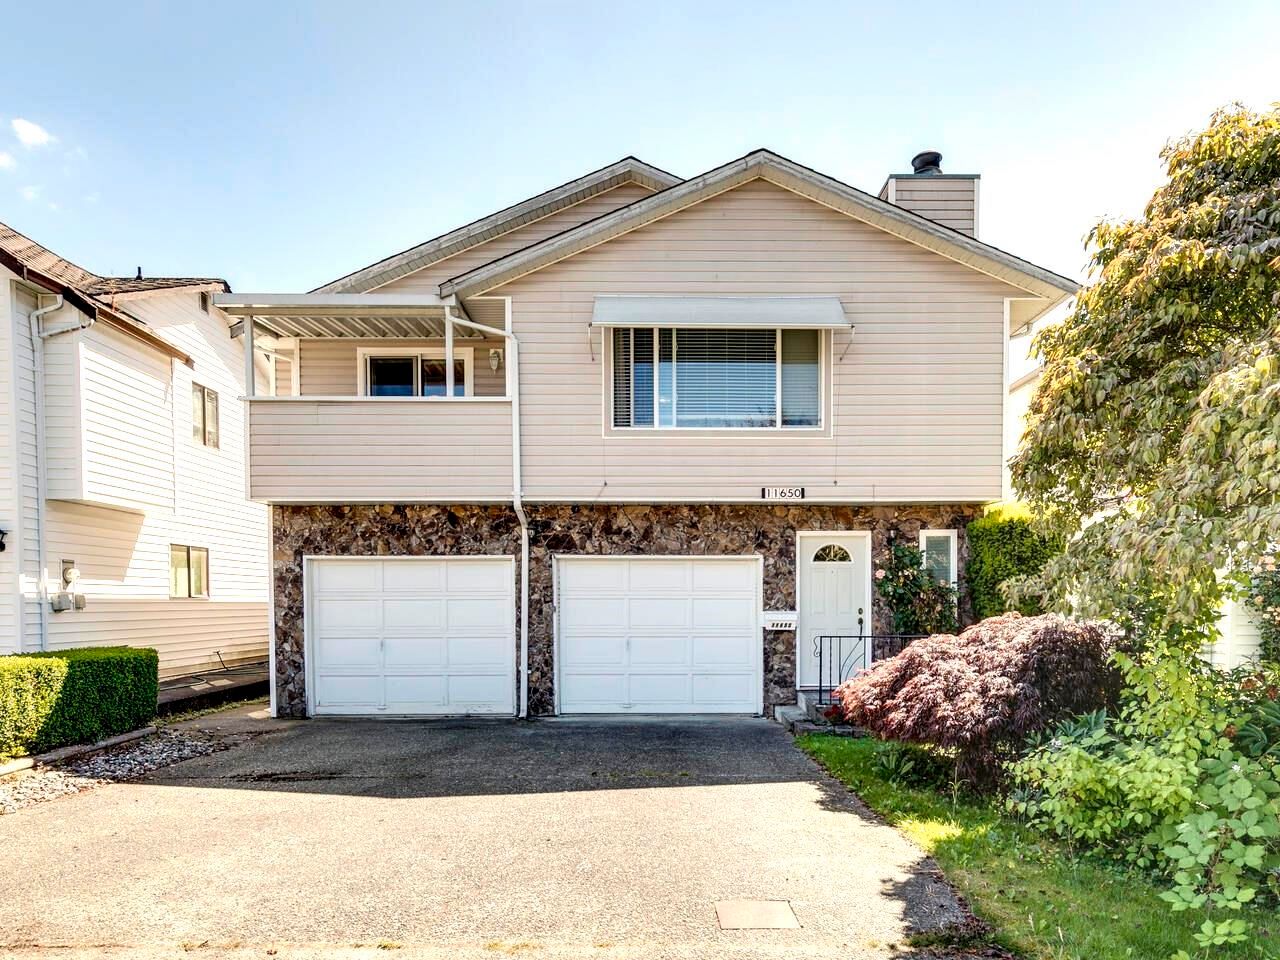 Open House on Sunday, August 21, 2022 1:00PM - 3:00PM
Gramma's house.  Spotless, gently lived in, a great location &amp; at this new price, a great buy for a serious Buyer.  See for yourself.  You'll be very glad you did!